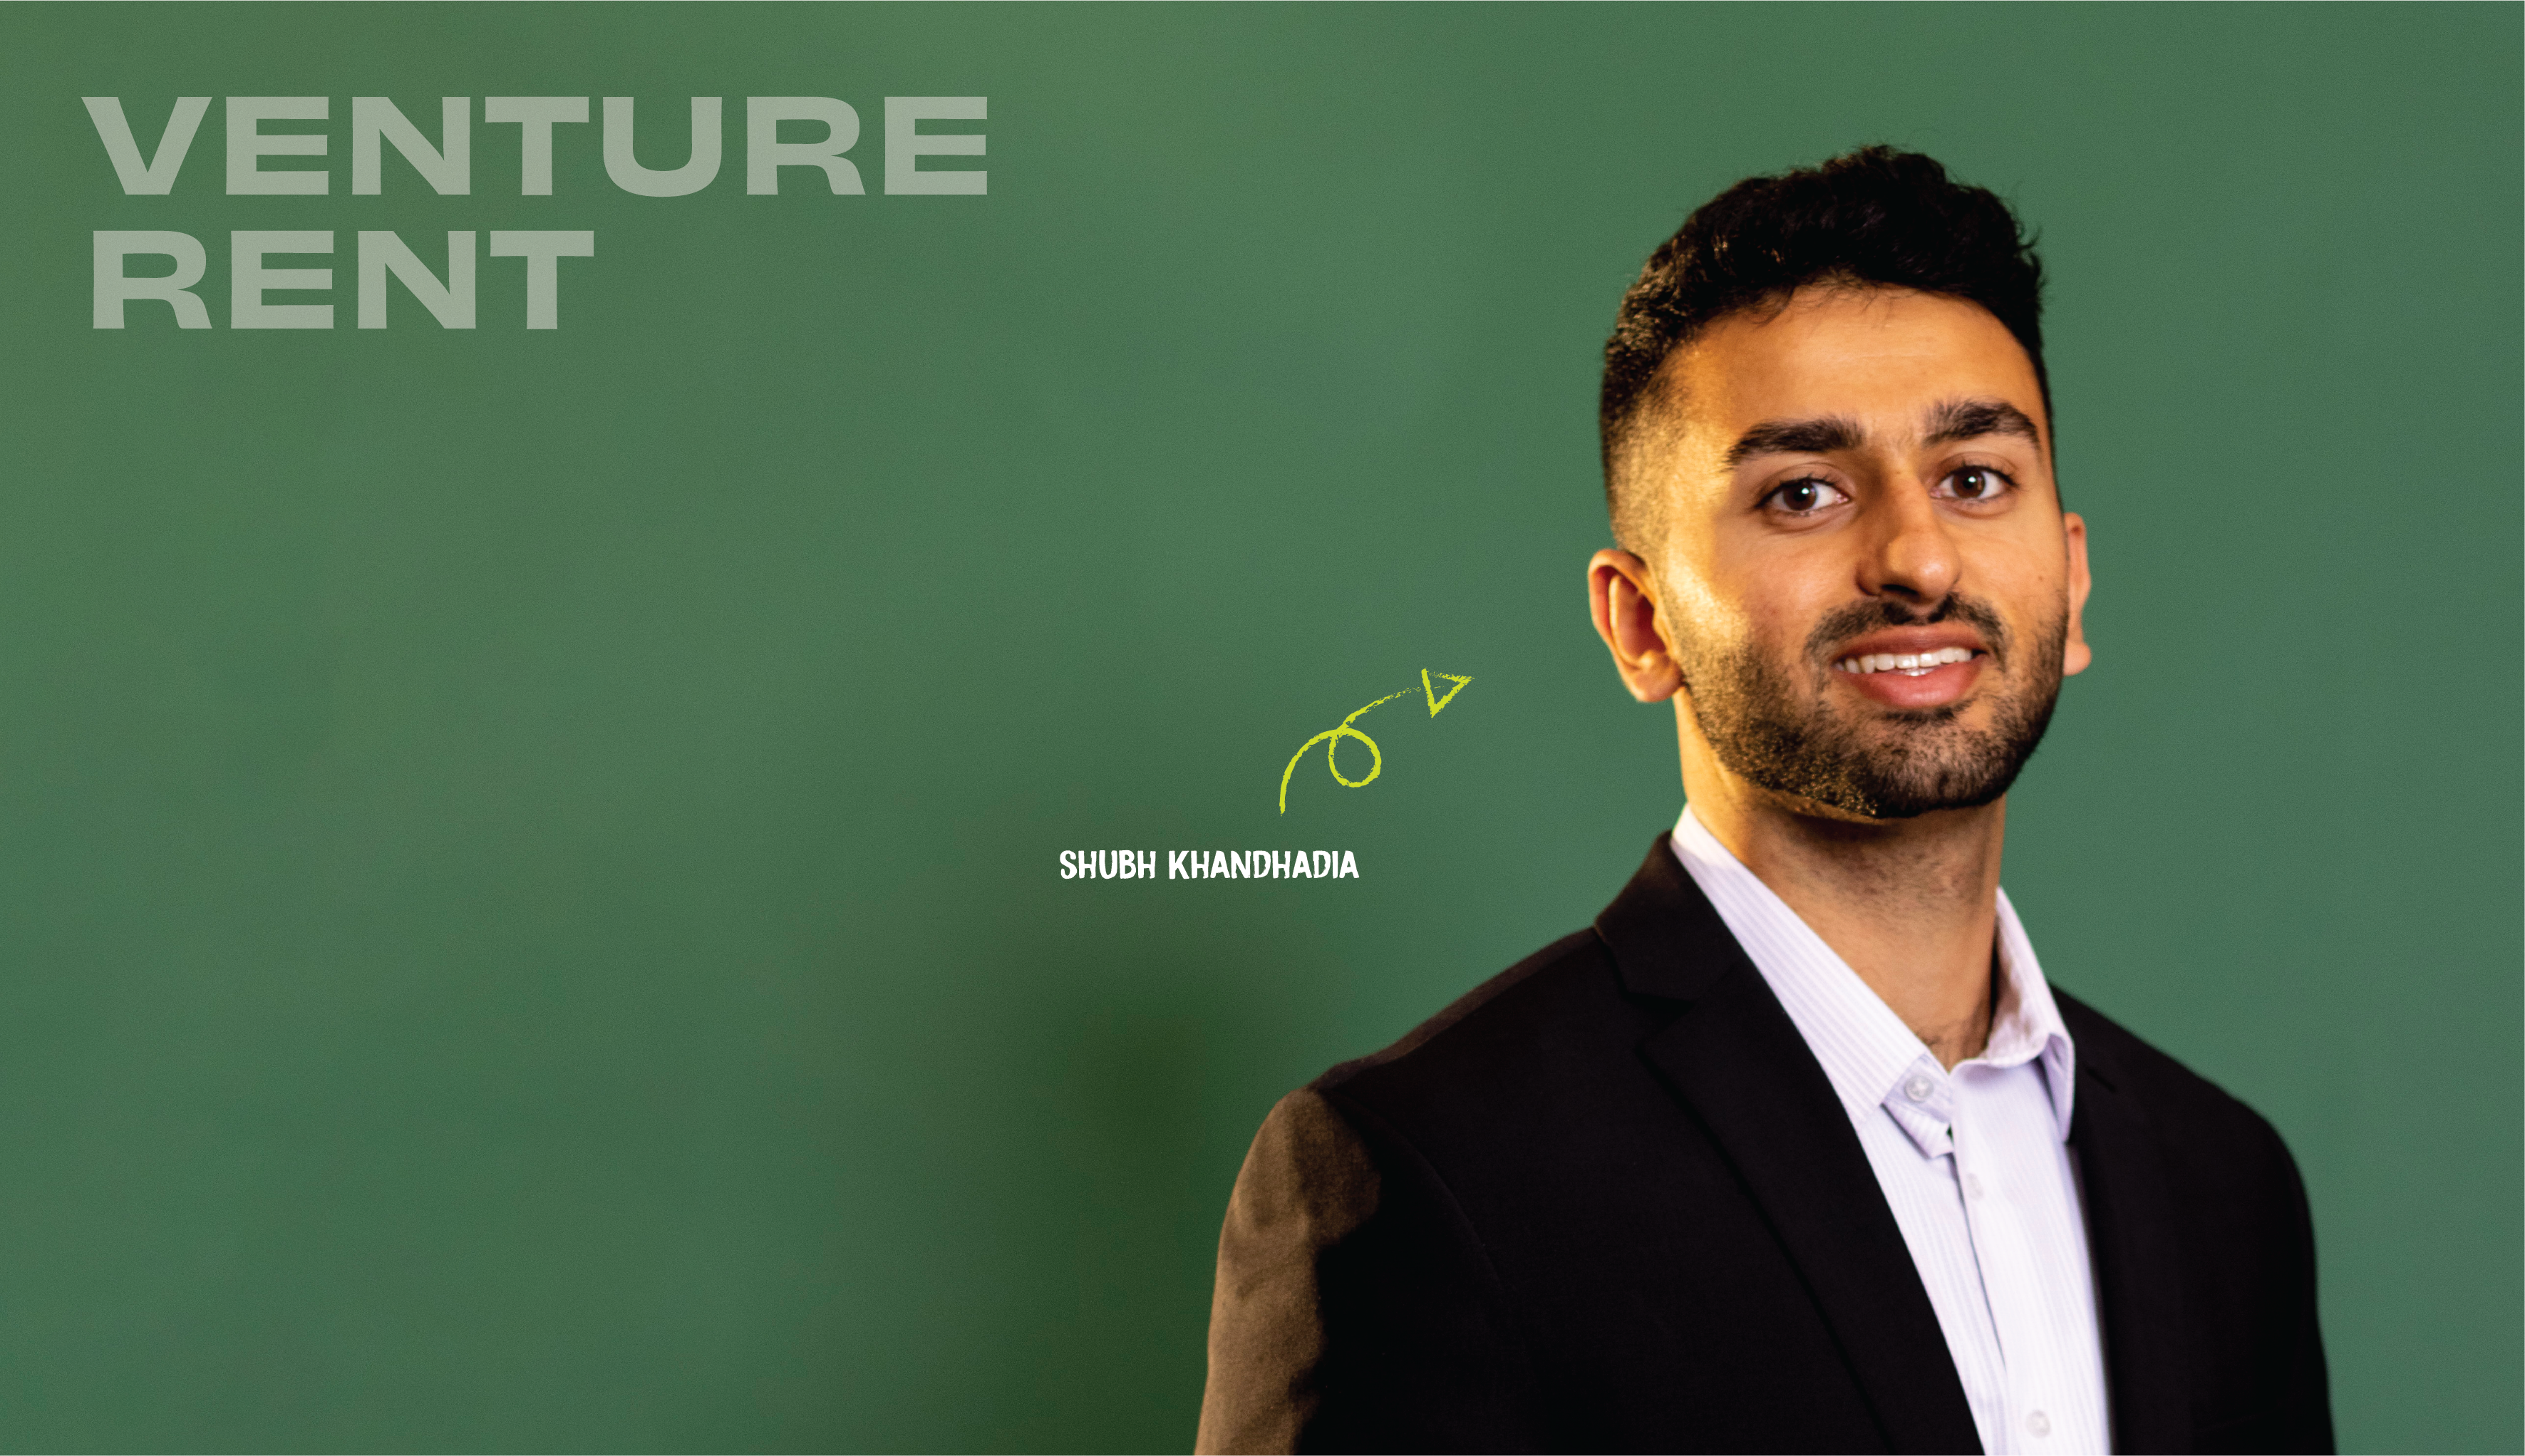 Venture Rent founder Shubh Khandadia standing in front of a green background, with graphics that say "Venture Rent" and "Shubh Khandhadia."